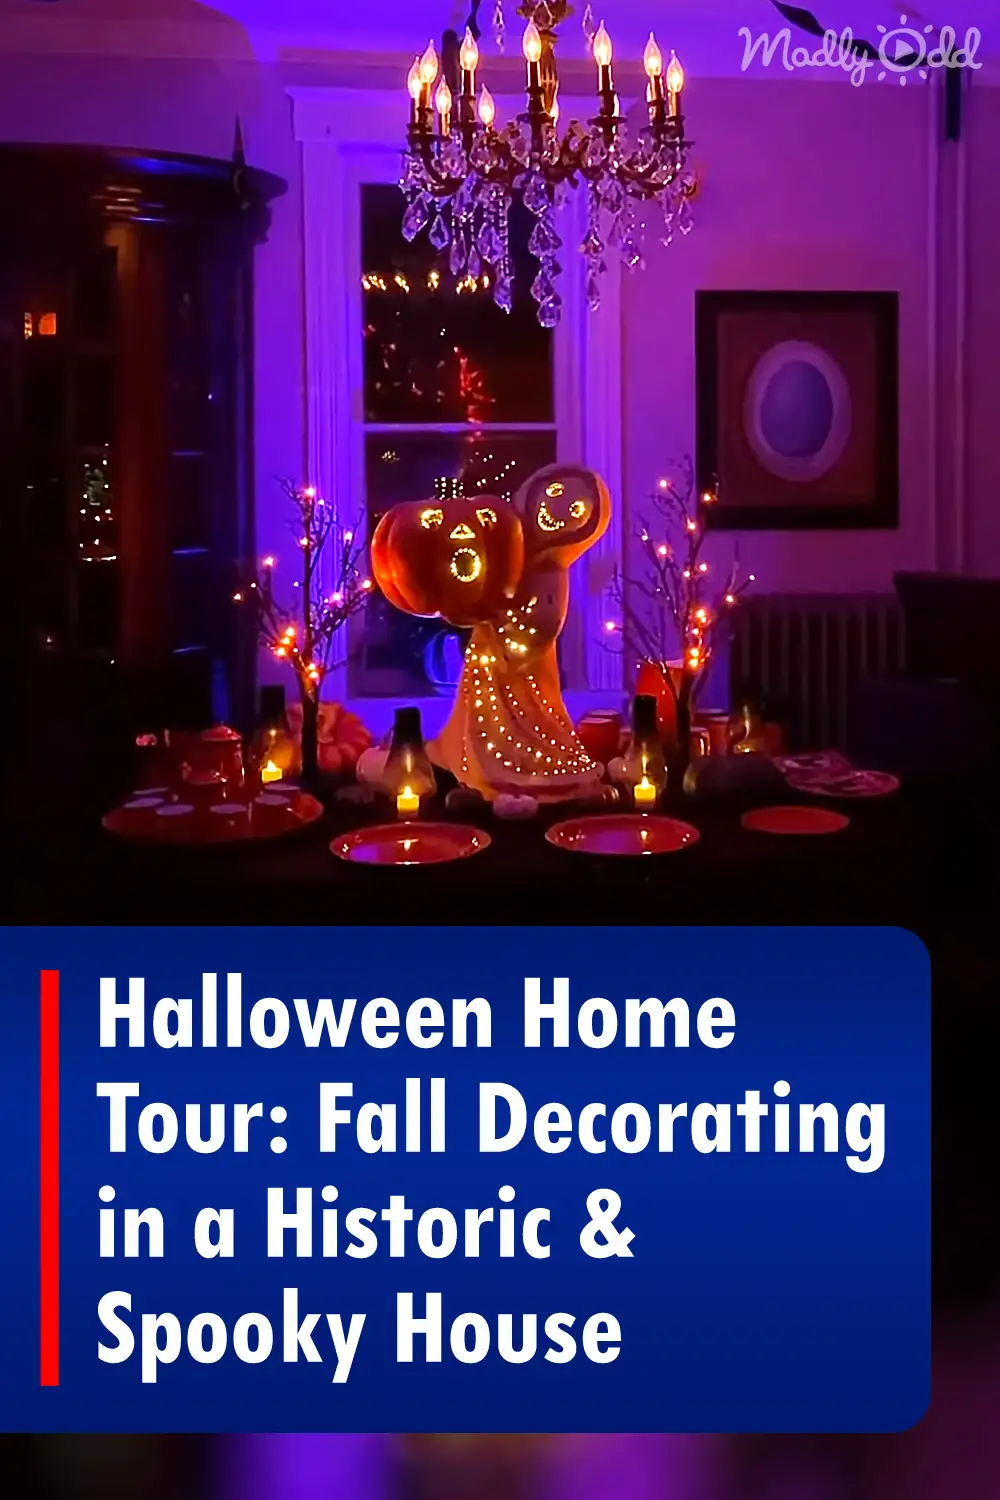 Halloween Home Tour: Fall Decorating in a Historic & Spooky House